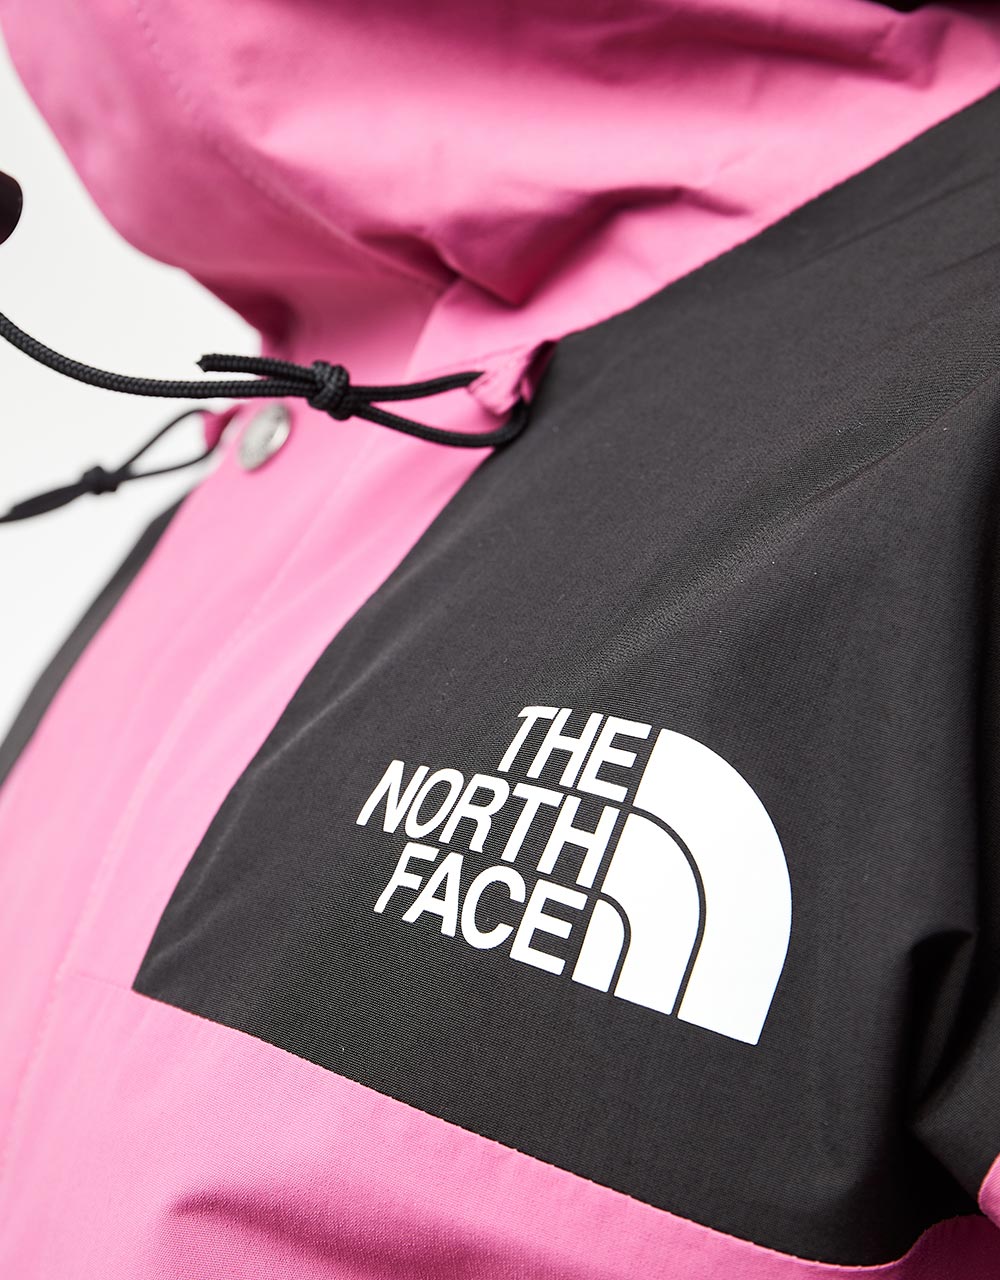 The North Face 86 Retro Mountain Jacket - Red Violet